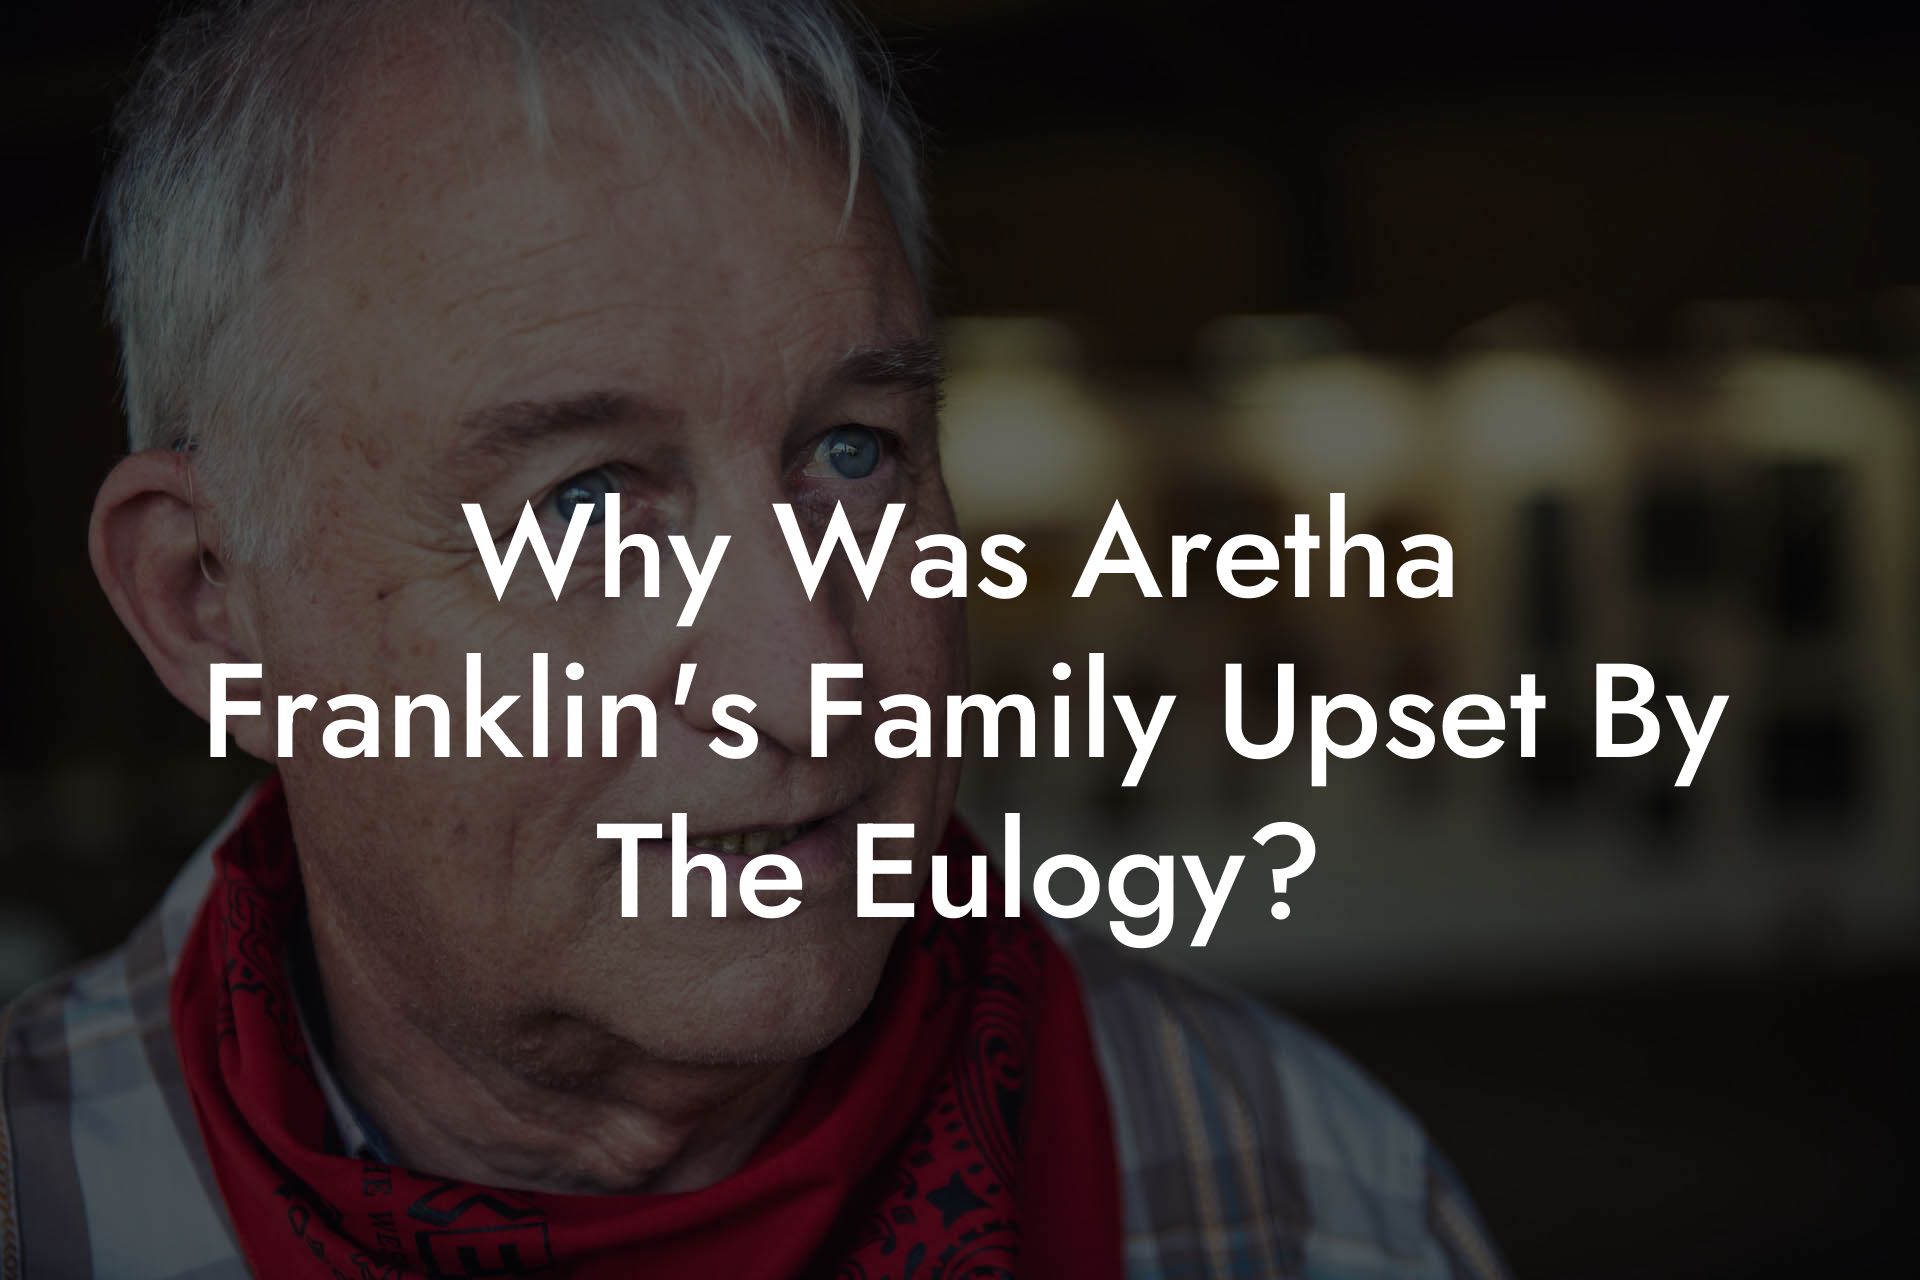 Why Was Aretha Franklin's Family Upset By The Eulogy?